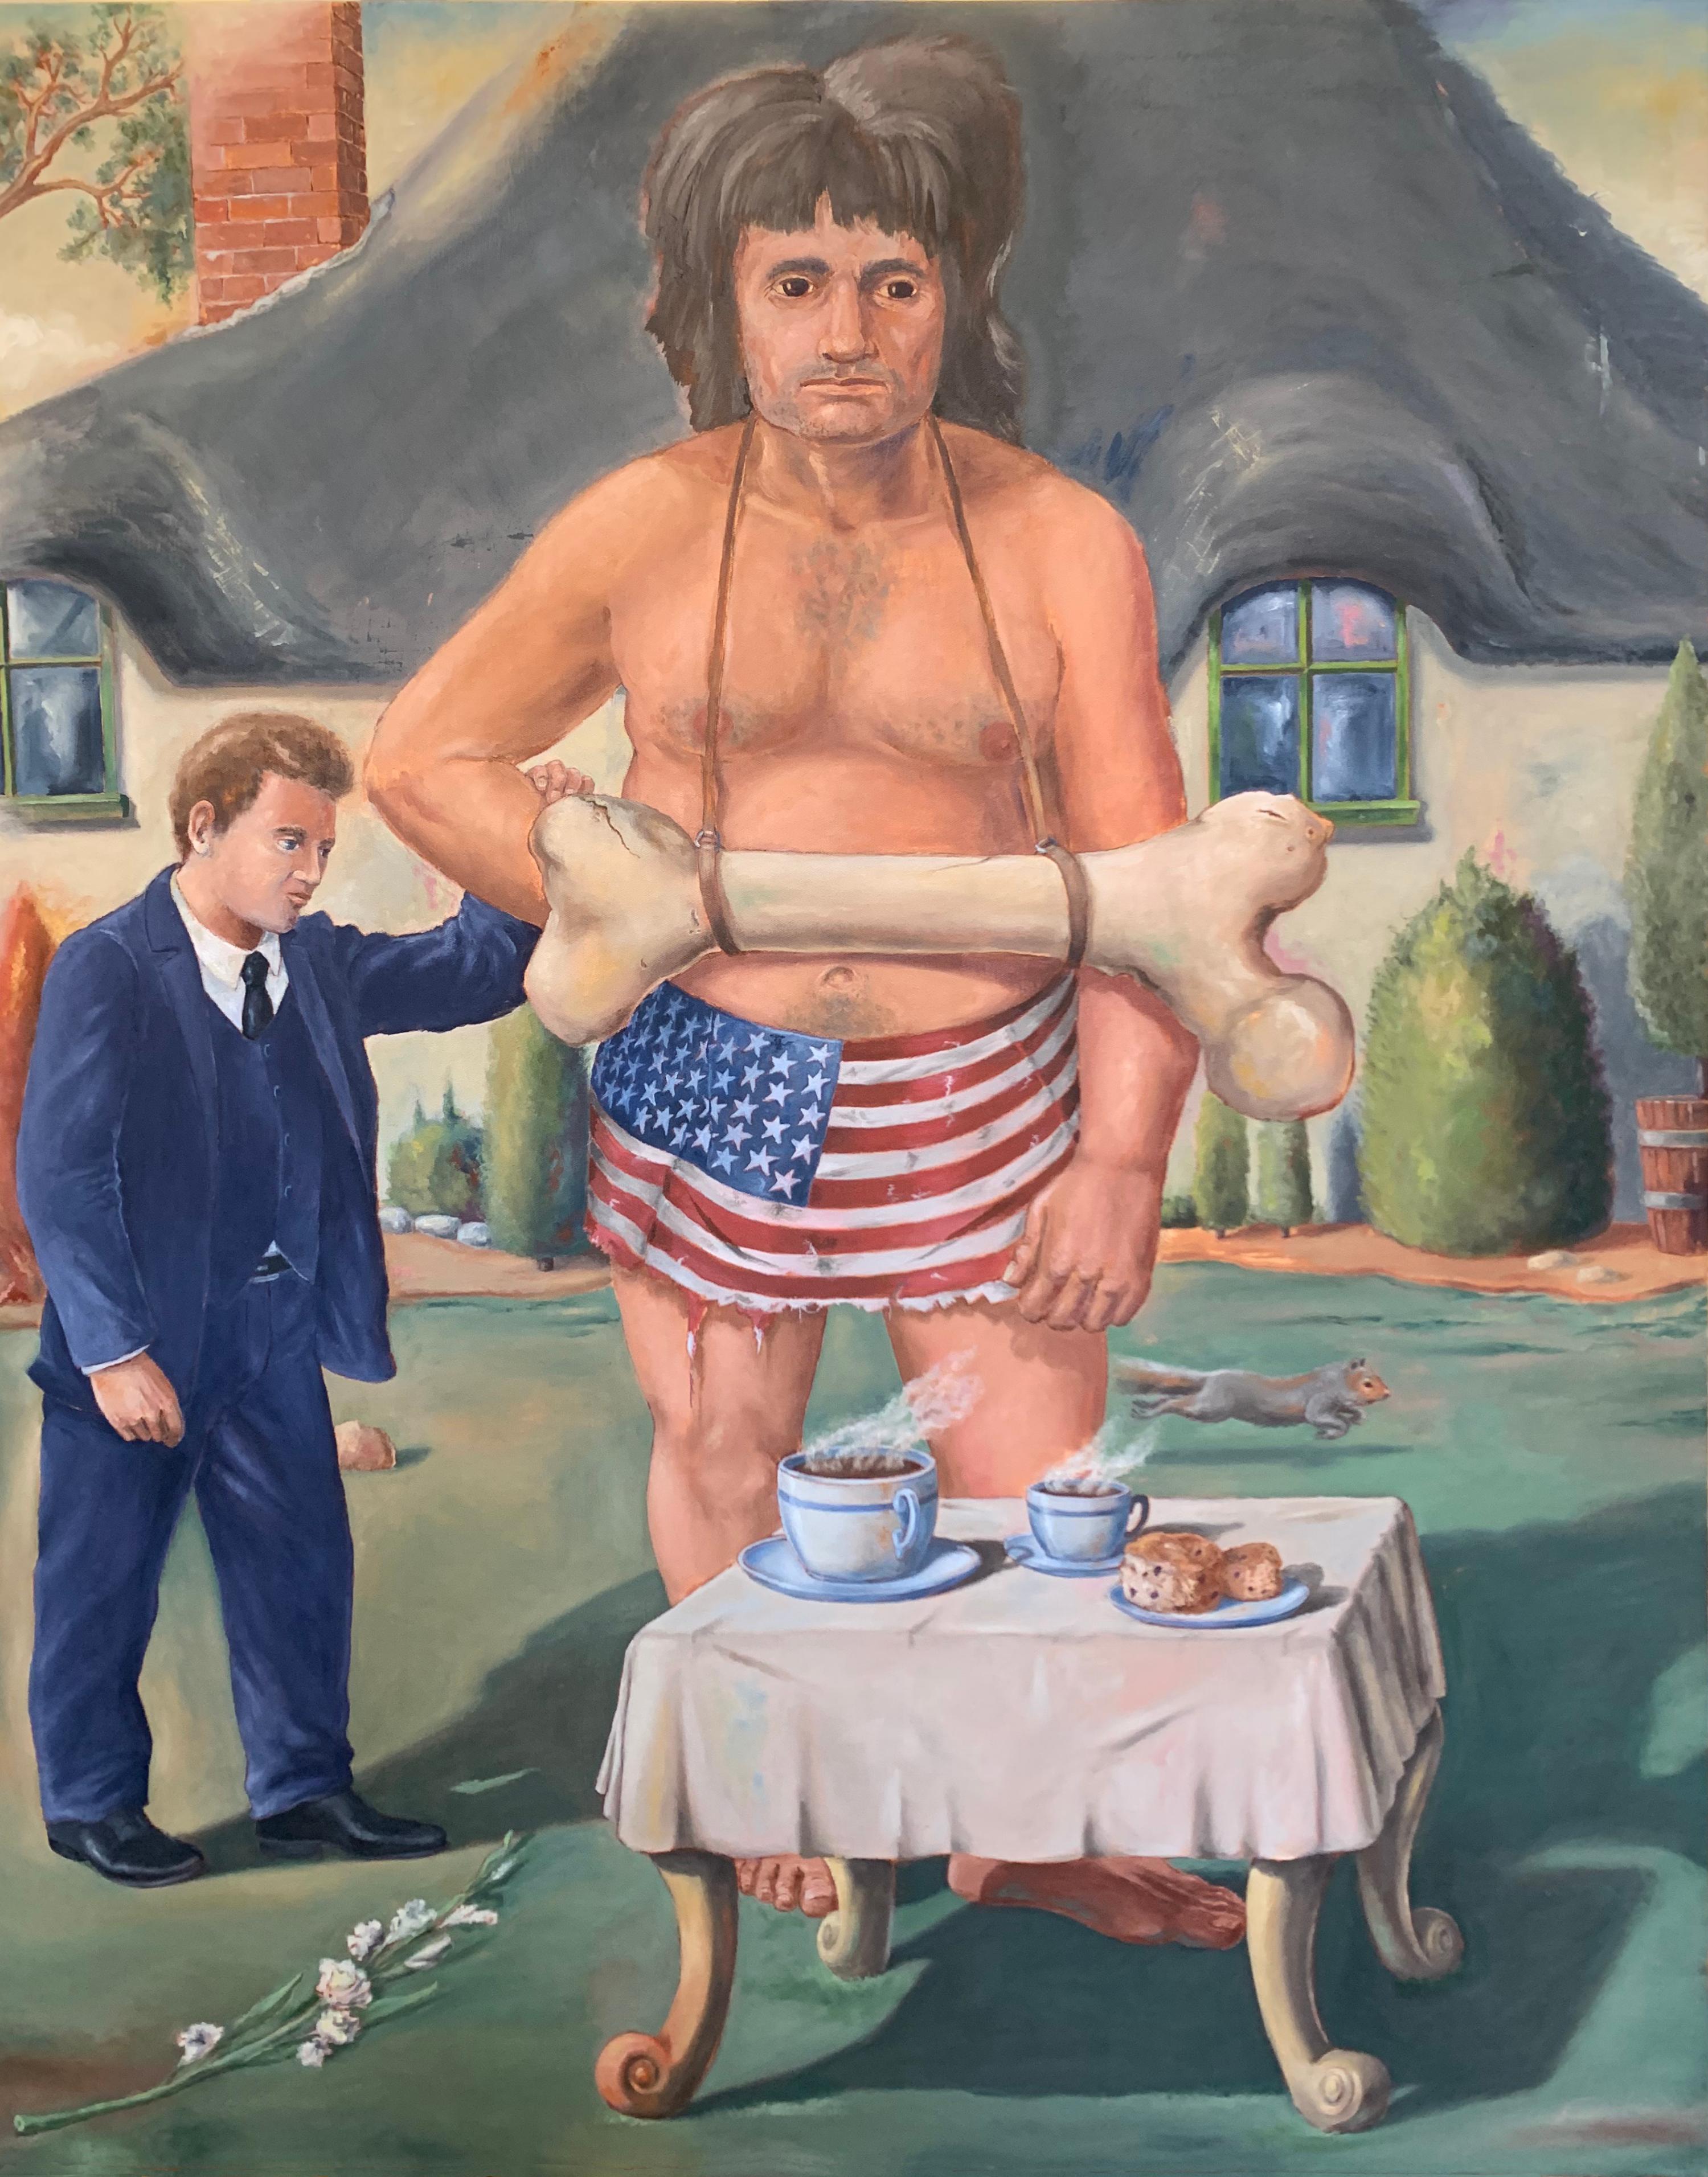 Tony Geiger Figurative Painting - "TOUR GIANT", surrealist painting, American flag, bone, cottage, cups, storybook